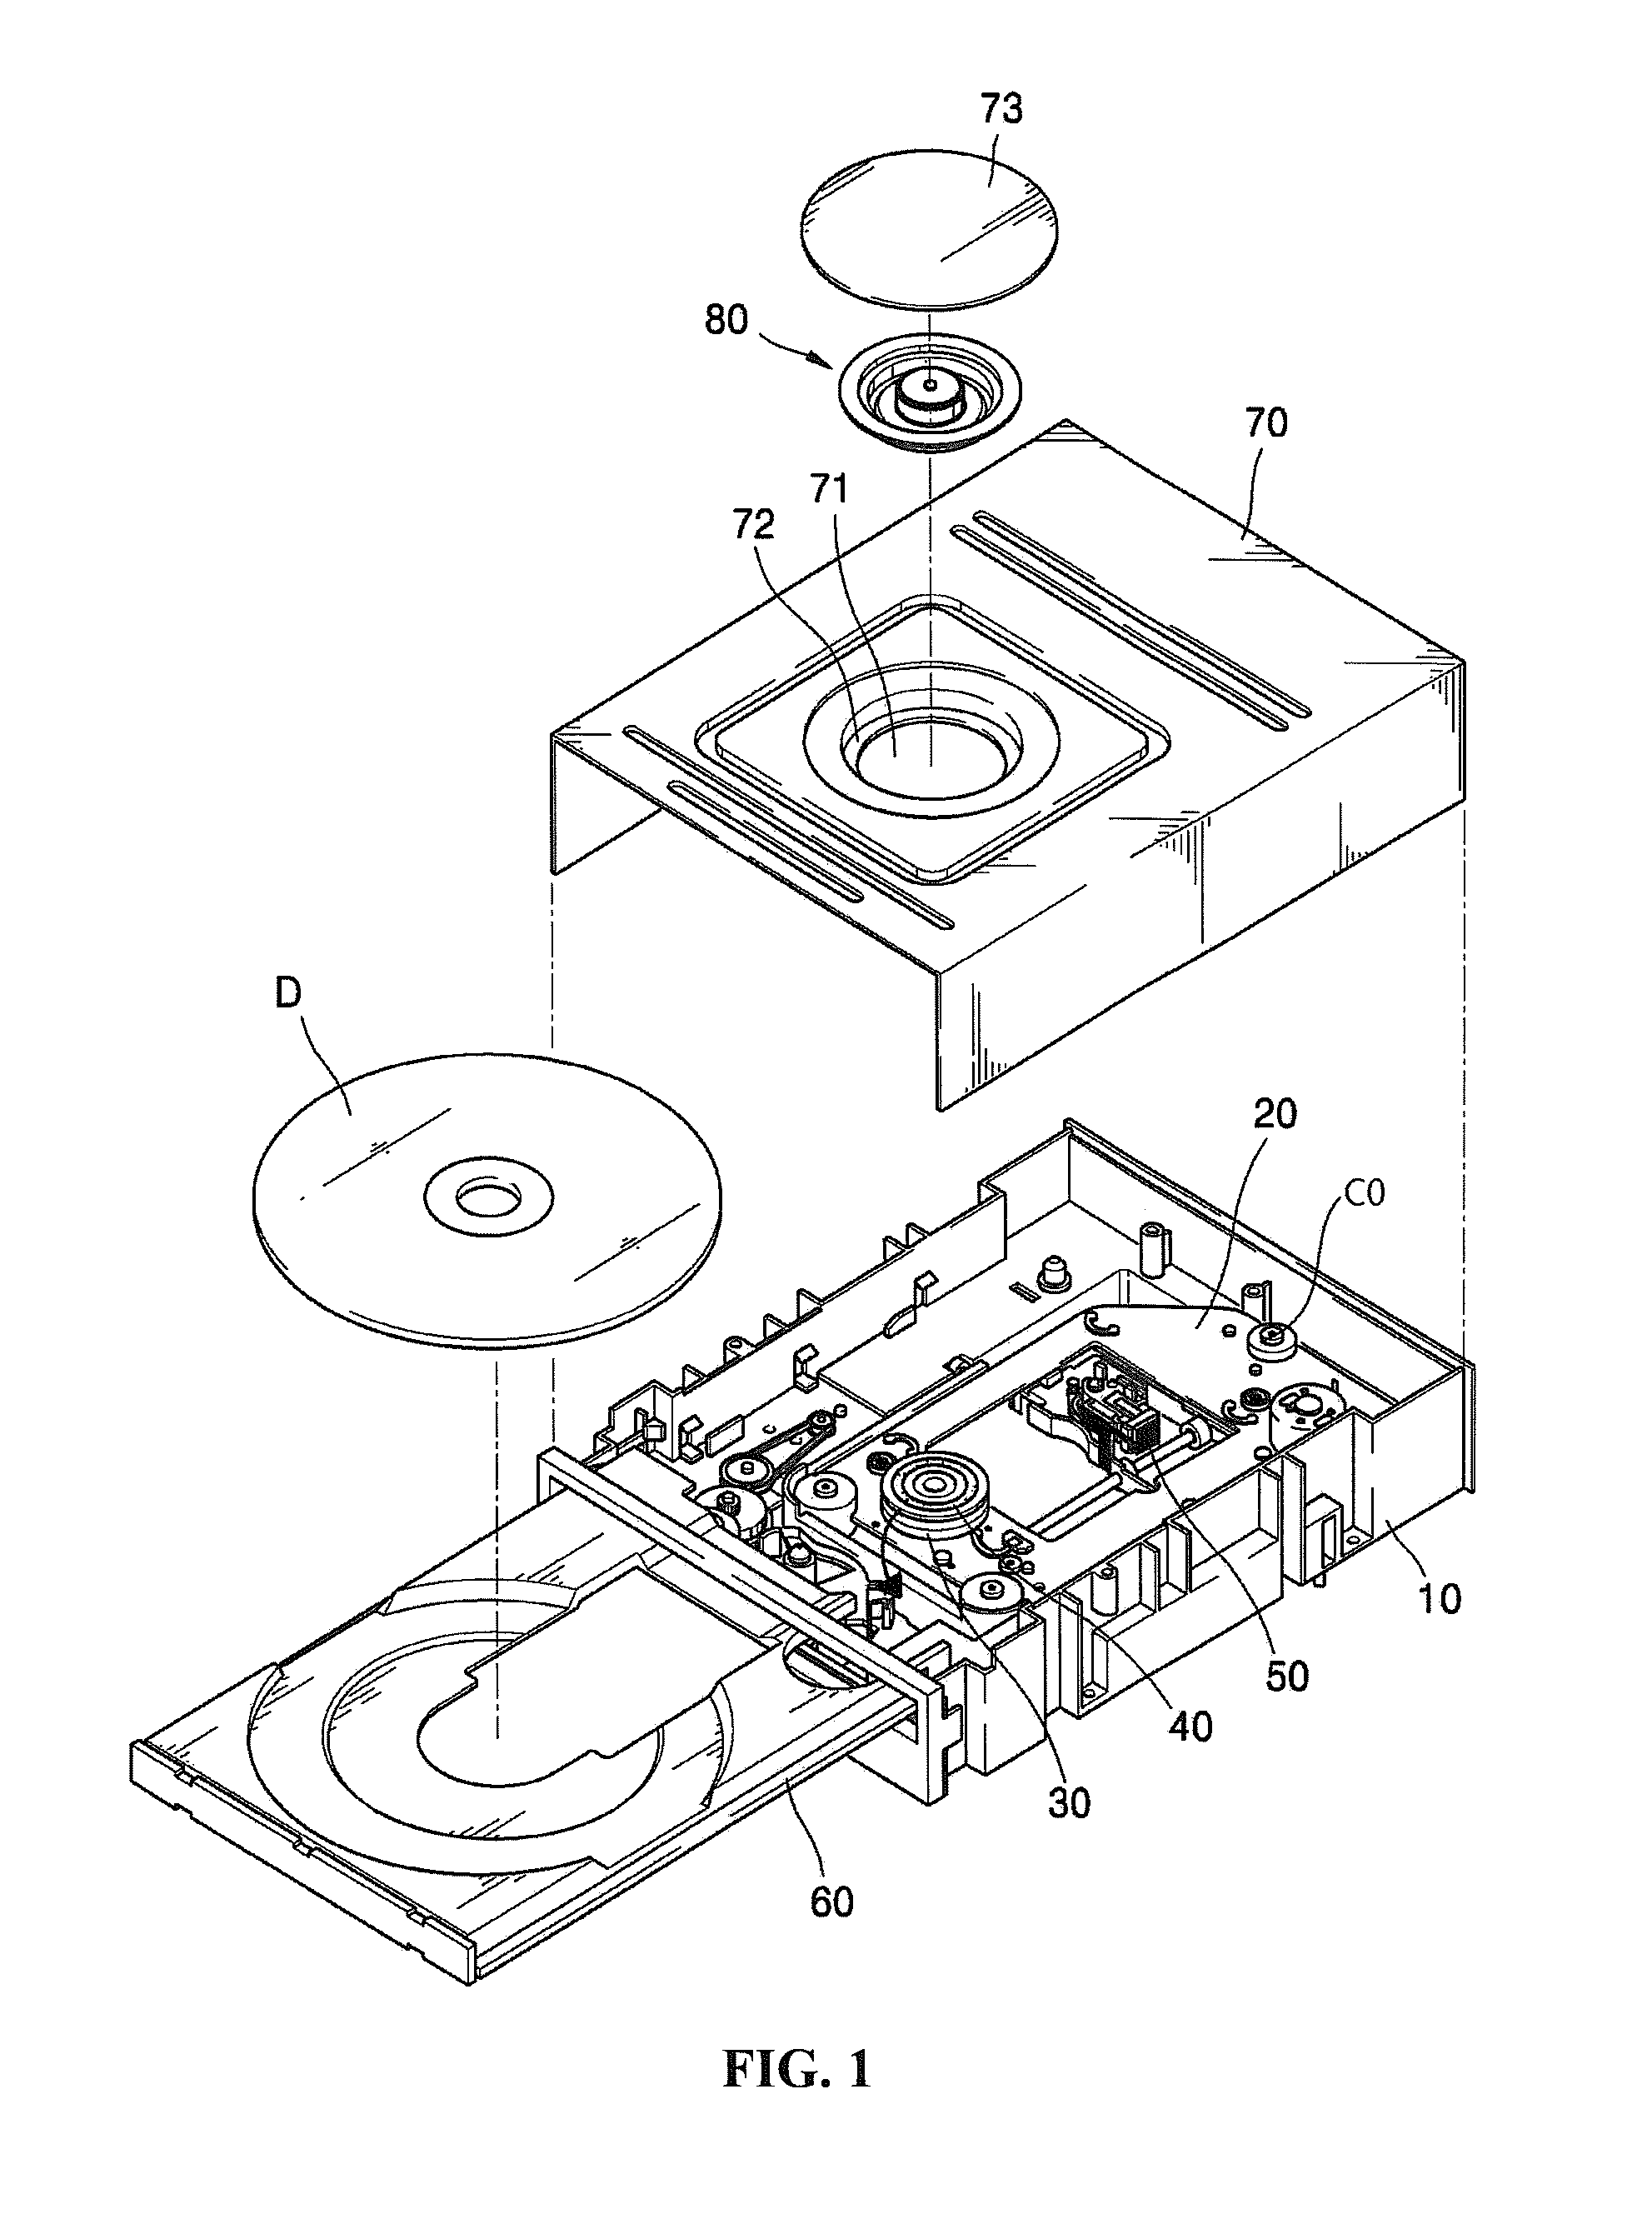 Optical disk drive device